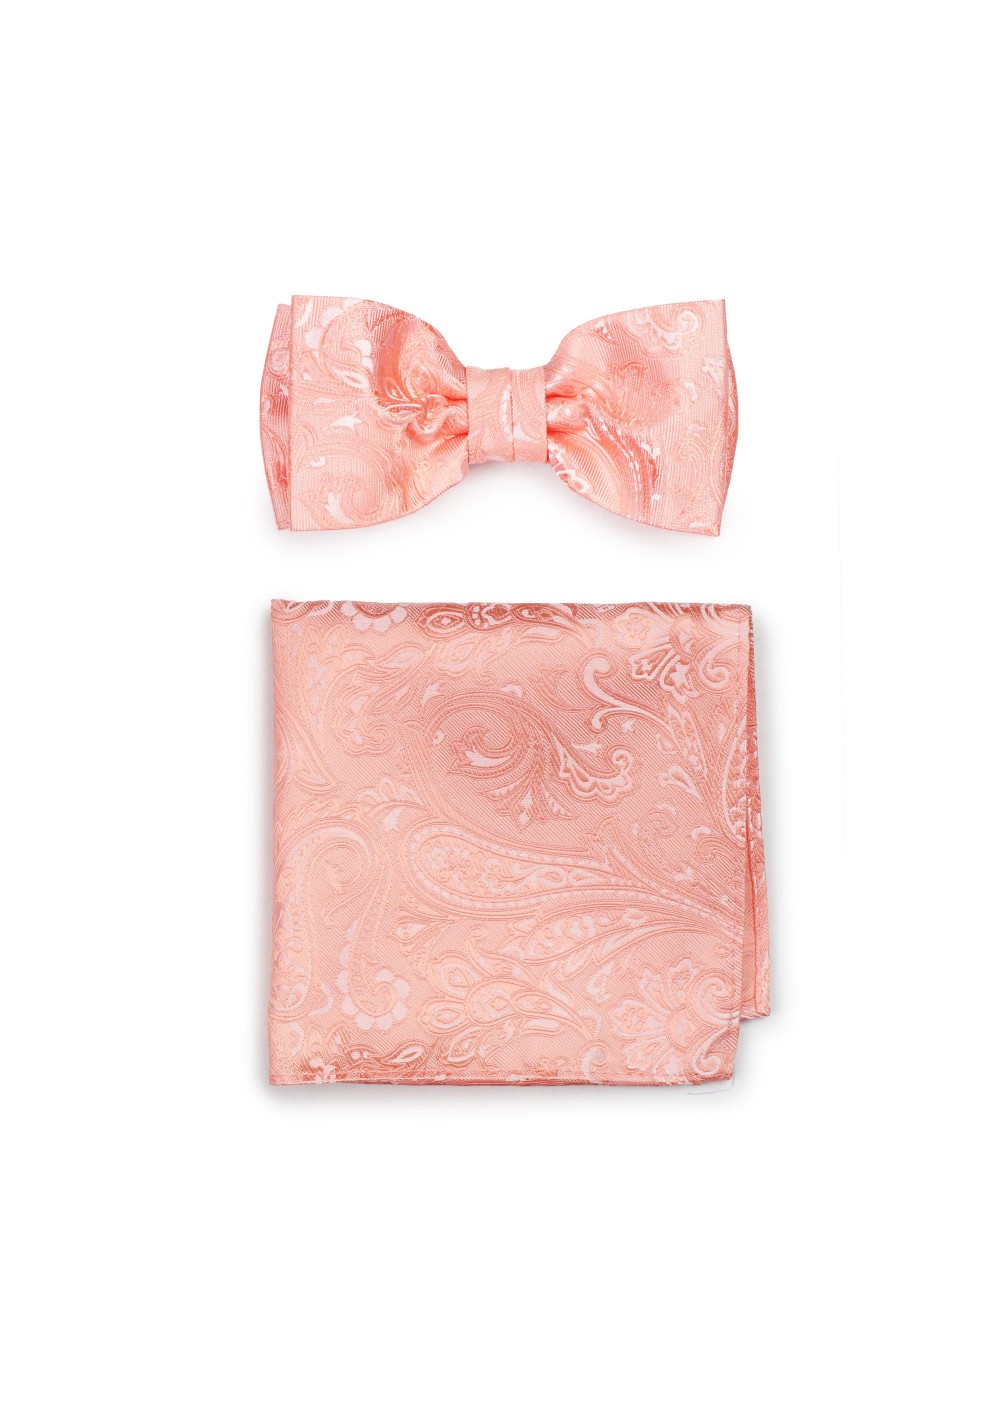 Woven Paisley Bow Tie and Pocket Square in Bellini